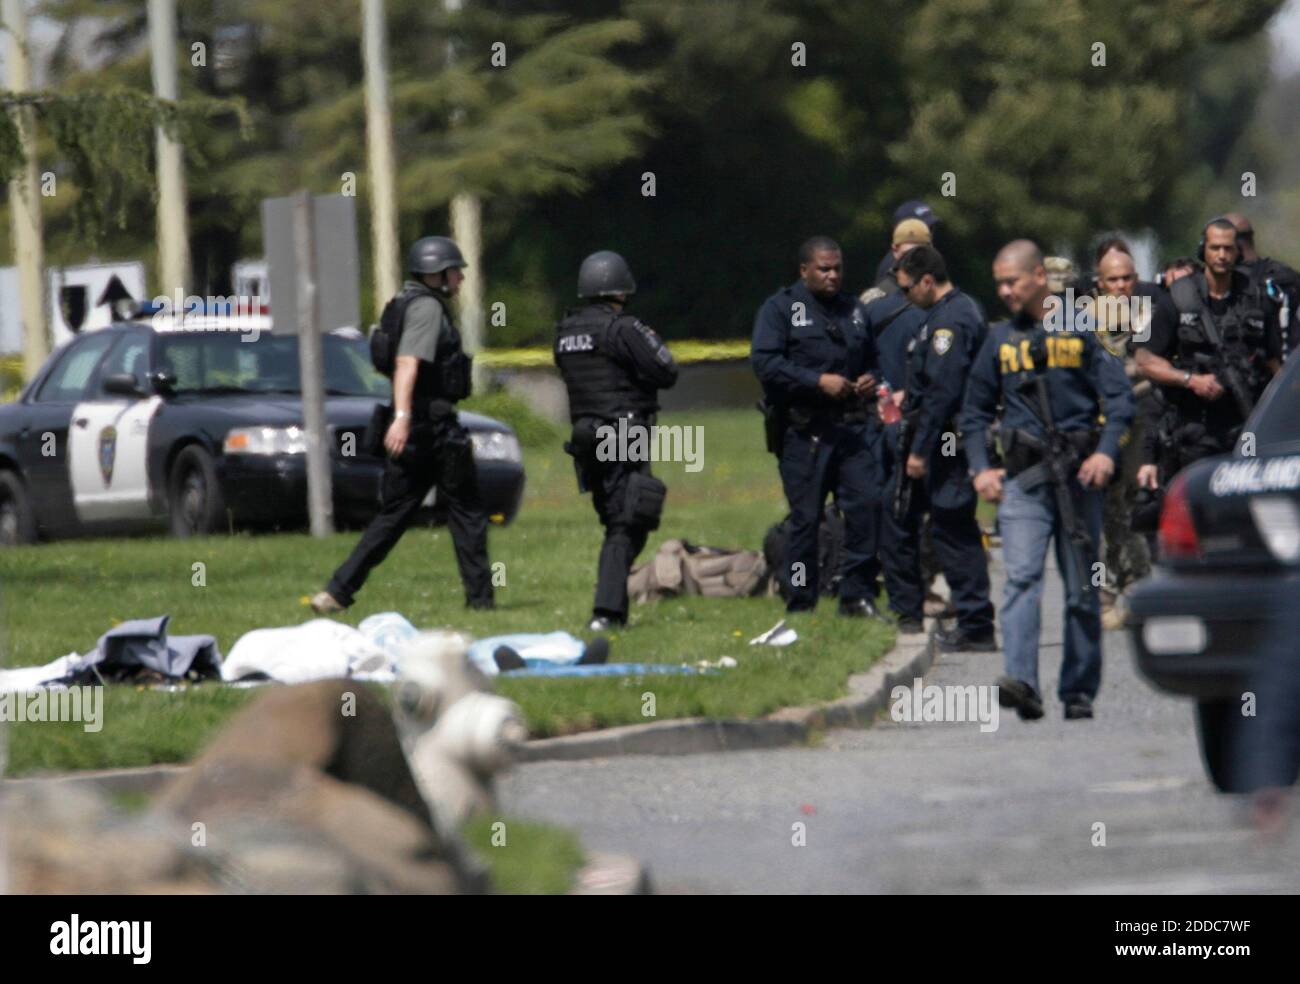 NO FILM, NO VIDEO, NO TV, NO DOCUMENTARY - Oakland police and fire department work the scene of a shooting at the Oikos University on Edgewater Dr. in Oakland, Ca, USA on Monday, April 2, 2012. Photo by Gary Reyes/San Jose Mercury News/MCT/ABACAPRESS.COM Stock Photo